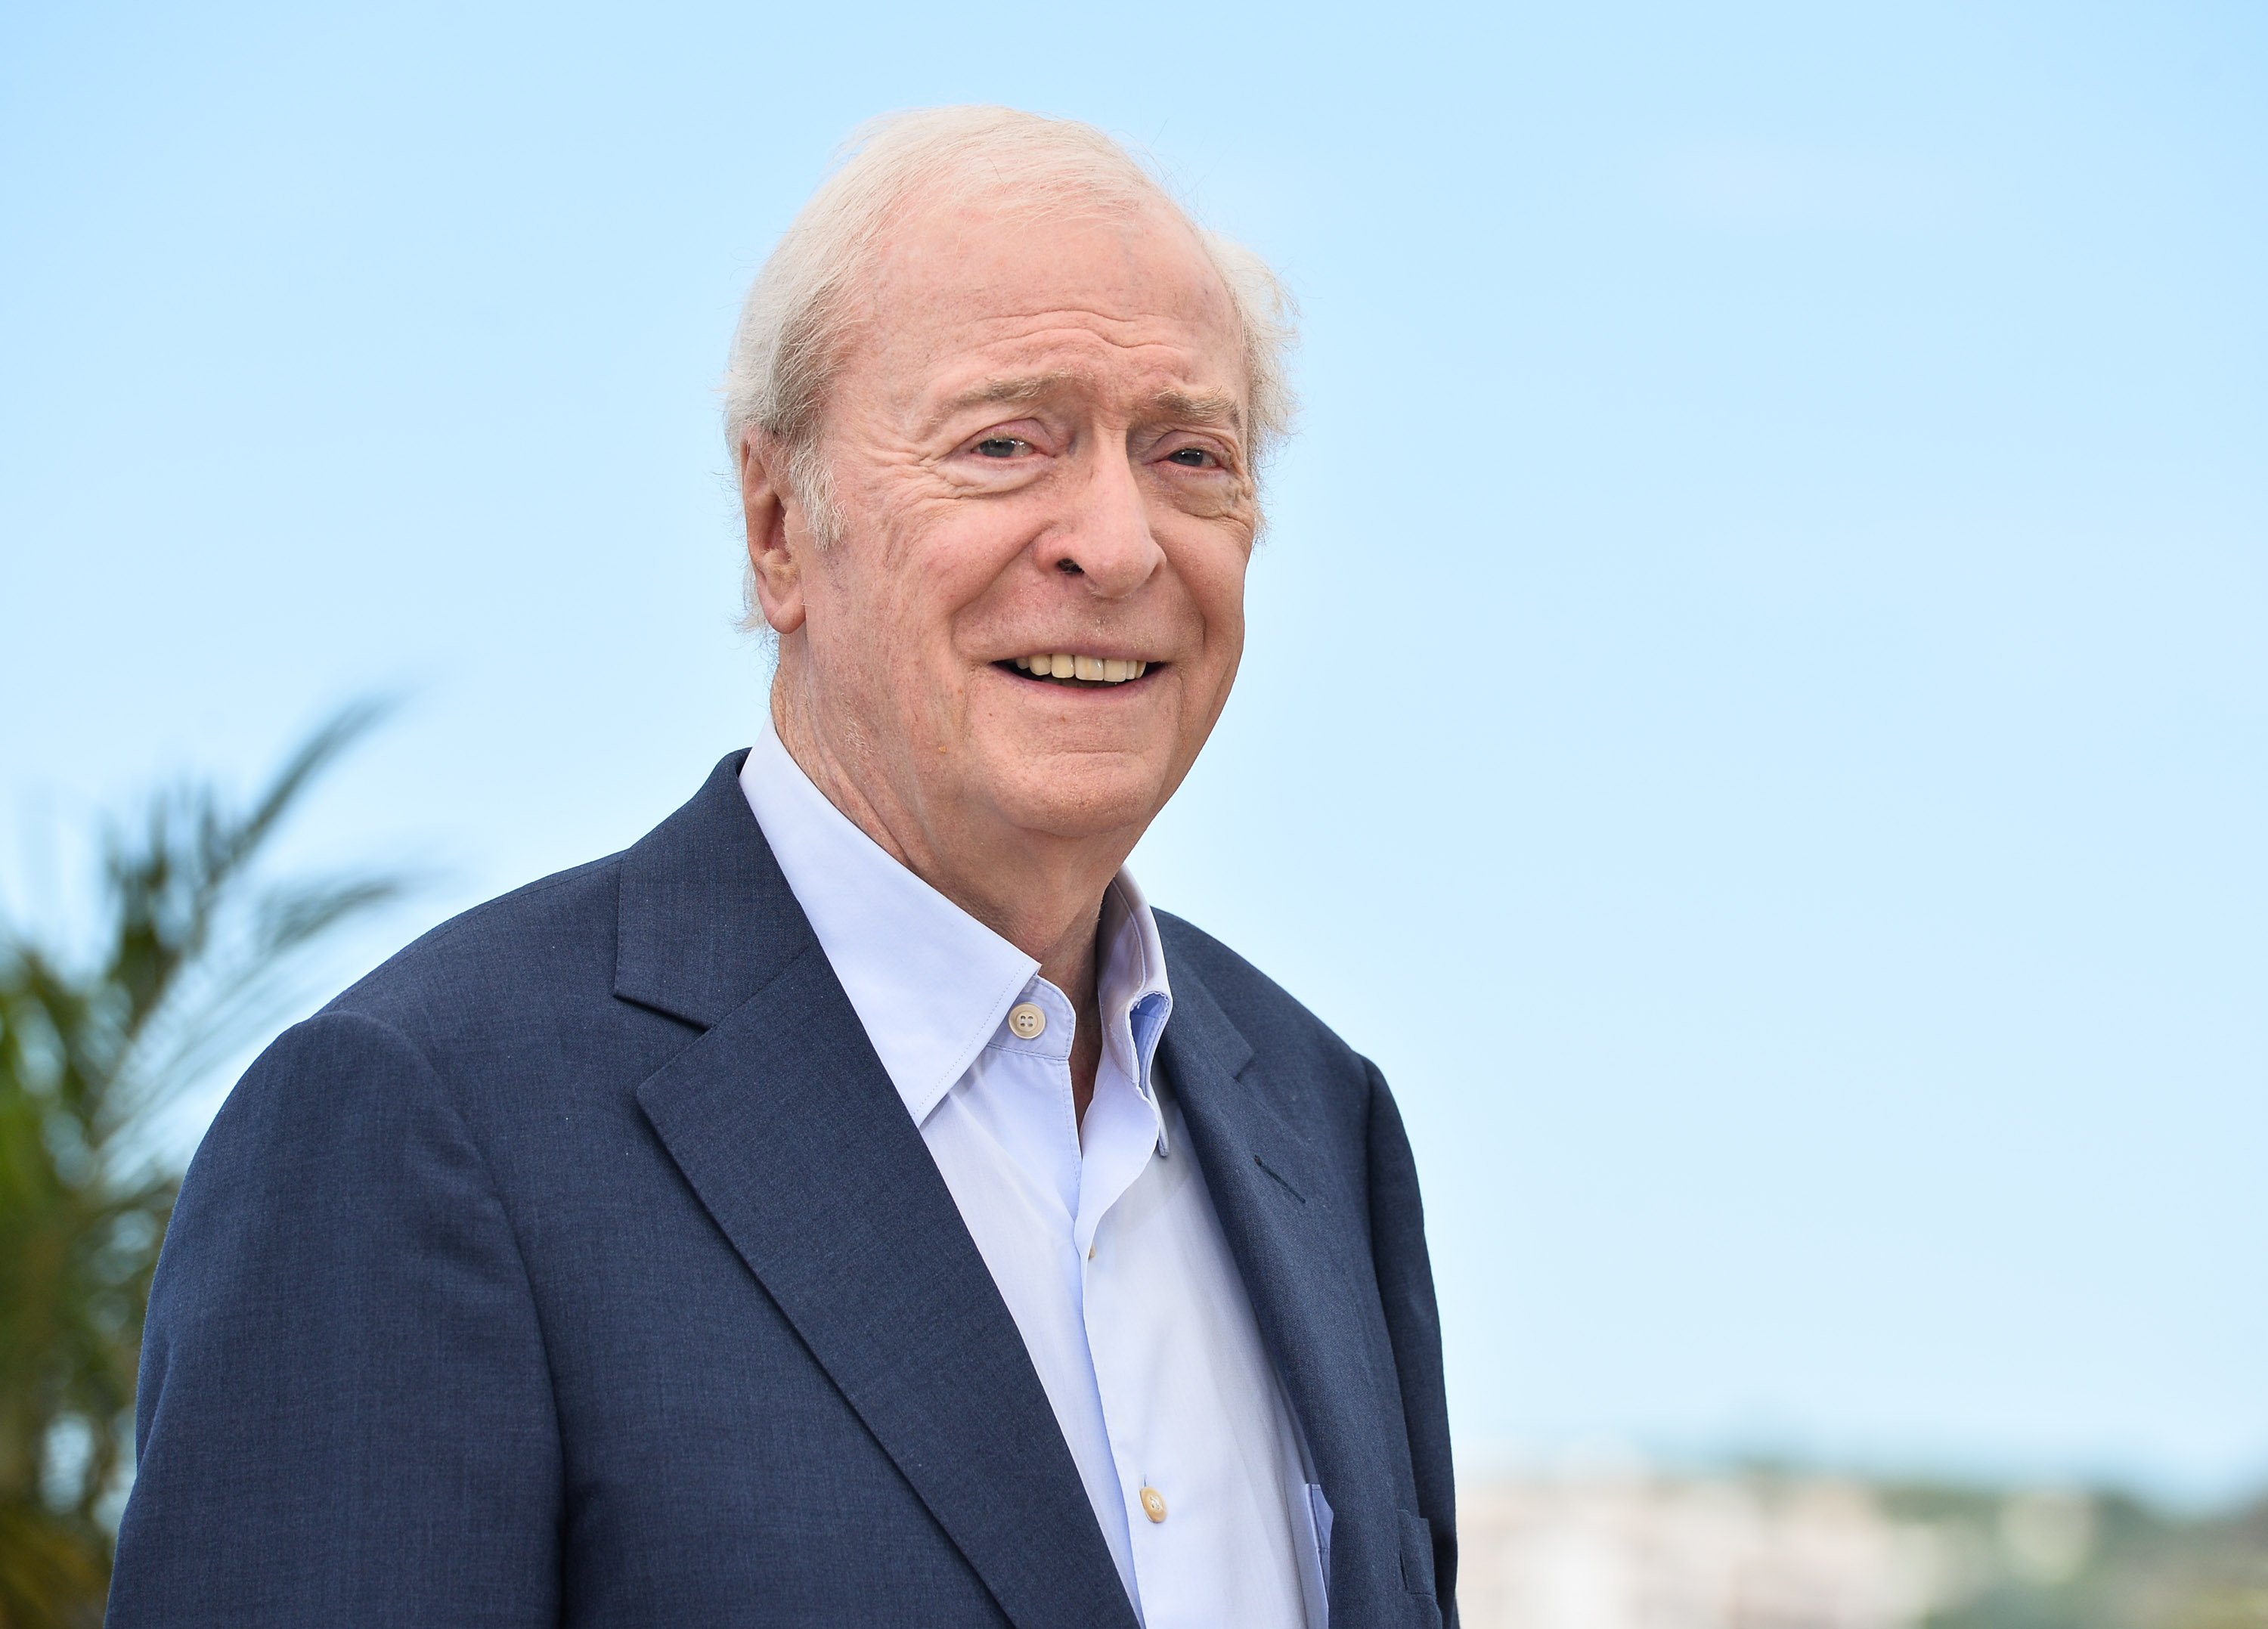 Michael Caine on May 20, 2015 in Cannes, France | Source: Getty Images